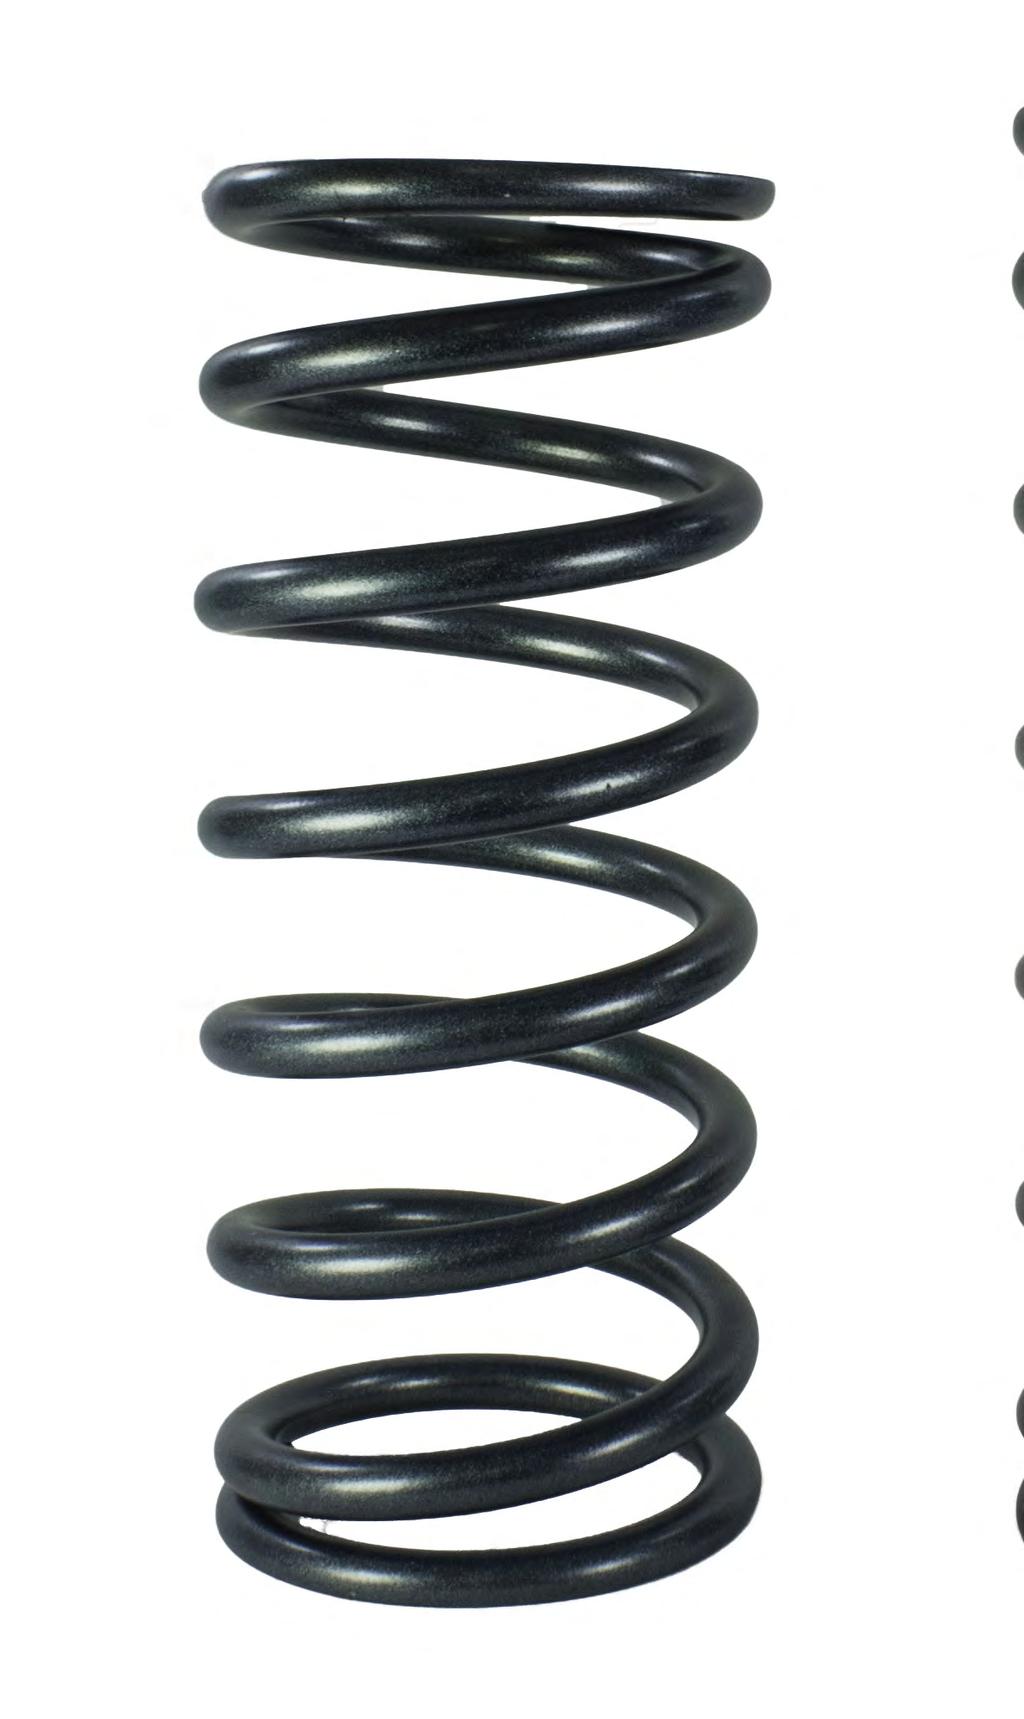 Whether you require a standard ride height heavy duty spring for commercial use and towing, or a plus 2 medium rate spring for off road use, Wildbear has